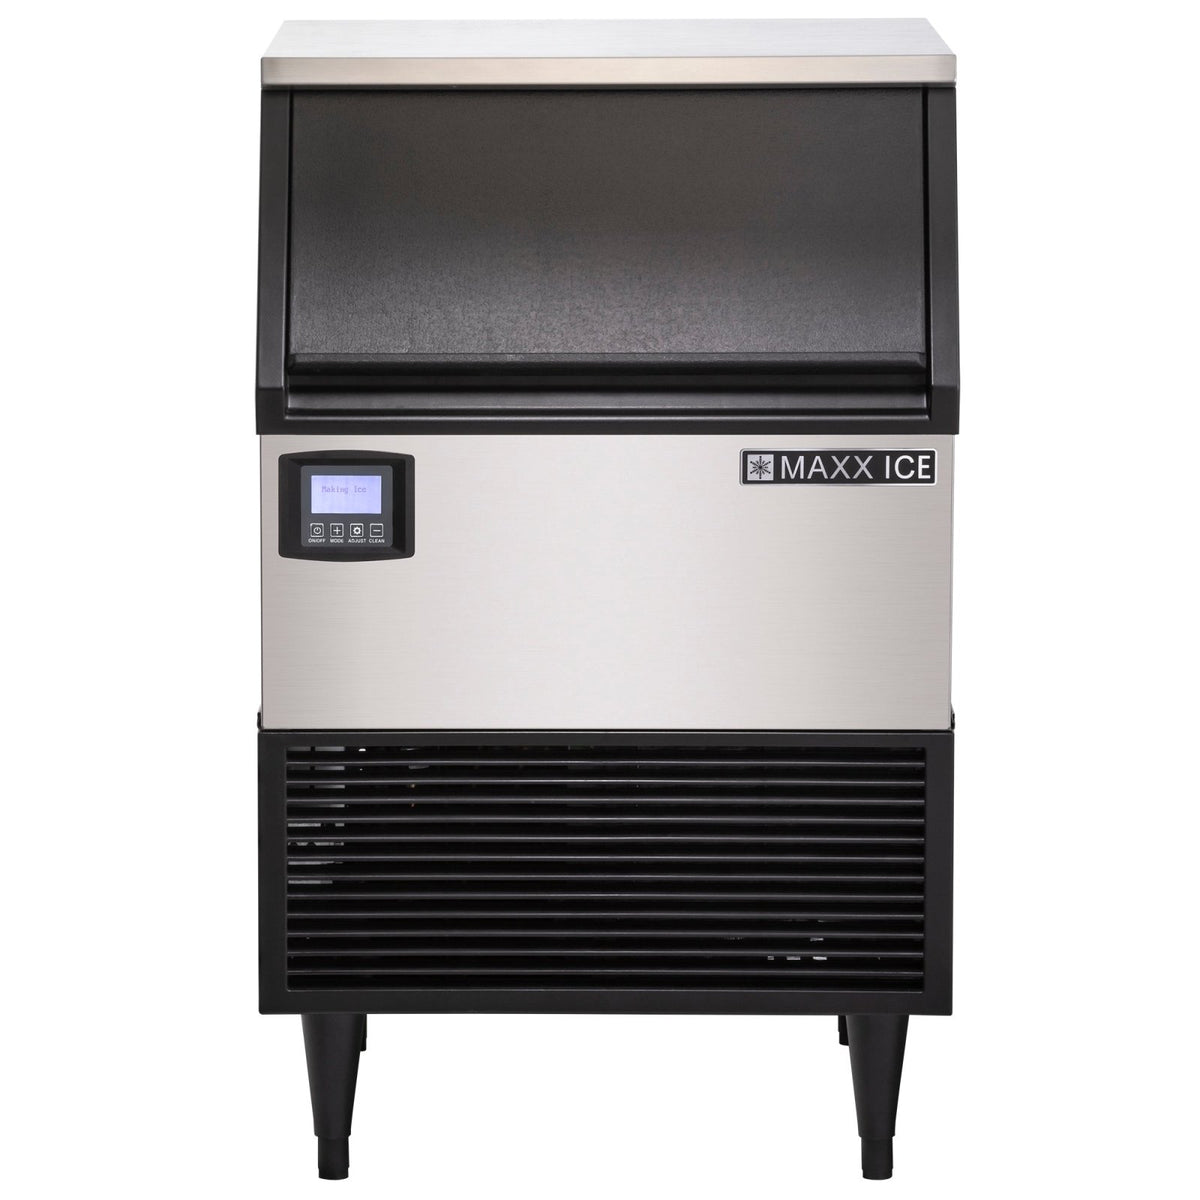 Maxx Ice MIM150N Intelligent Series Ice Machine, 152 lbs, Full Dice Ice Cubes, 75 lbs Built - in Ice Storage Bin, Stainless Steel with Black Trim - TheChefStore.Com